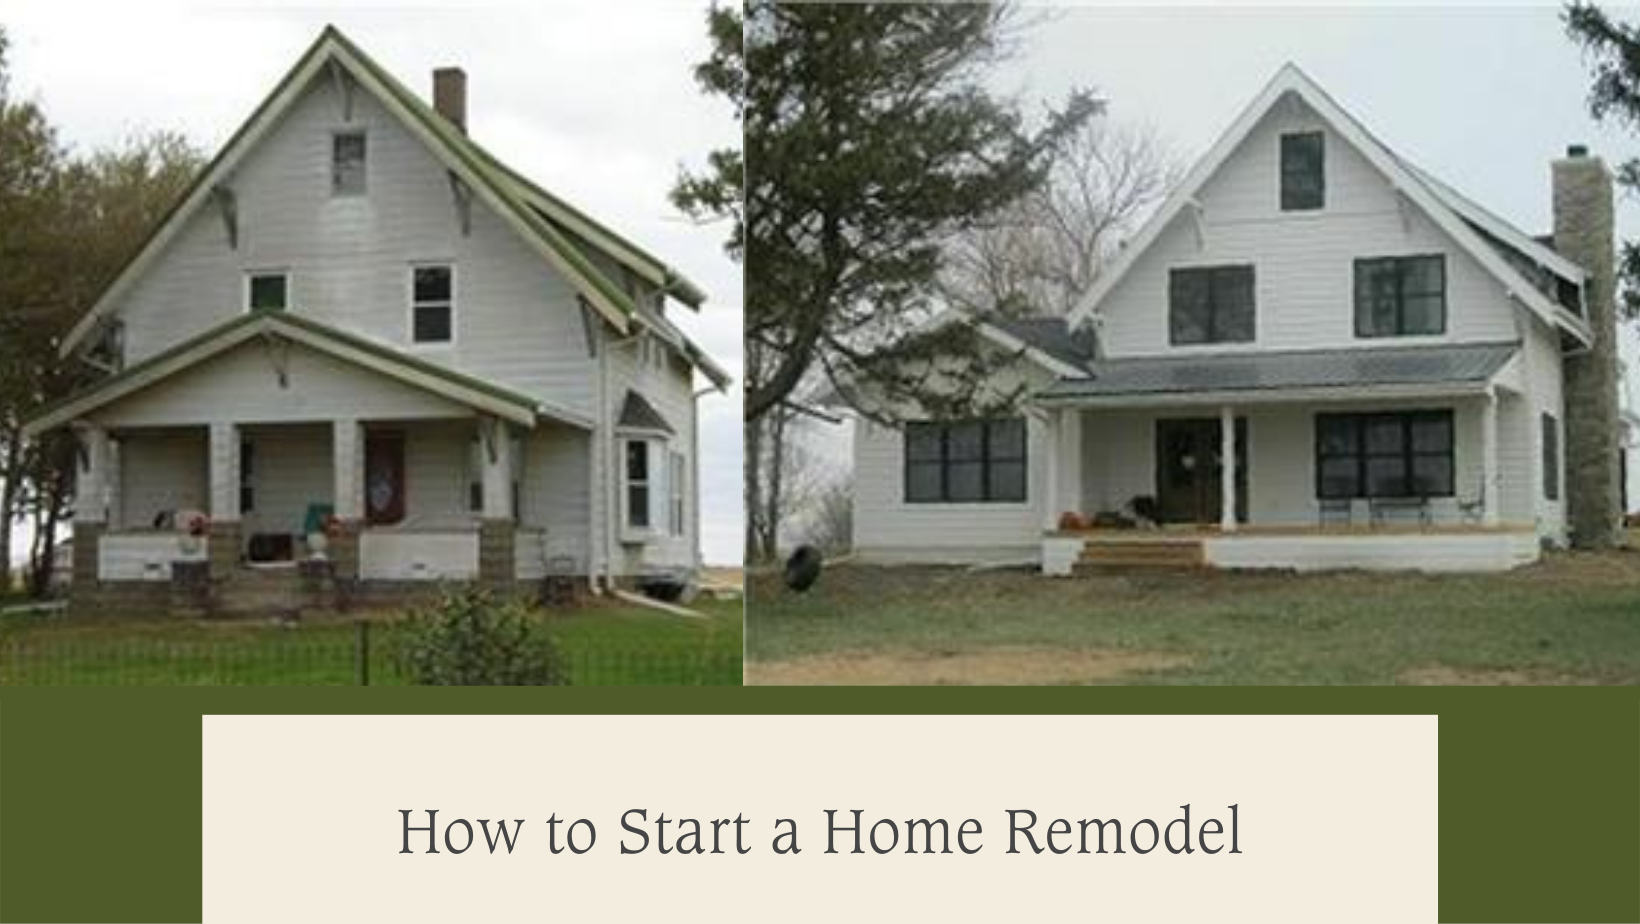 How to Start a Home Remodel